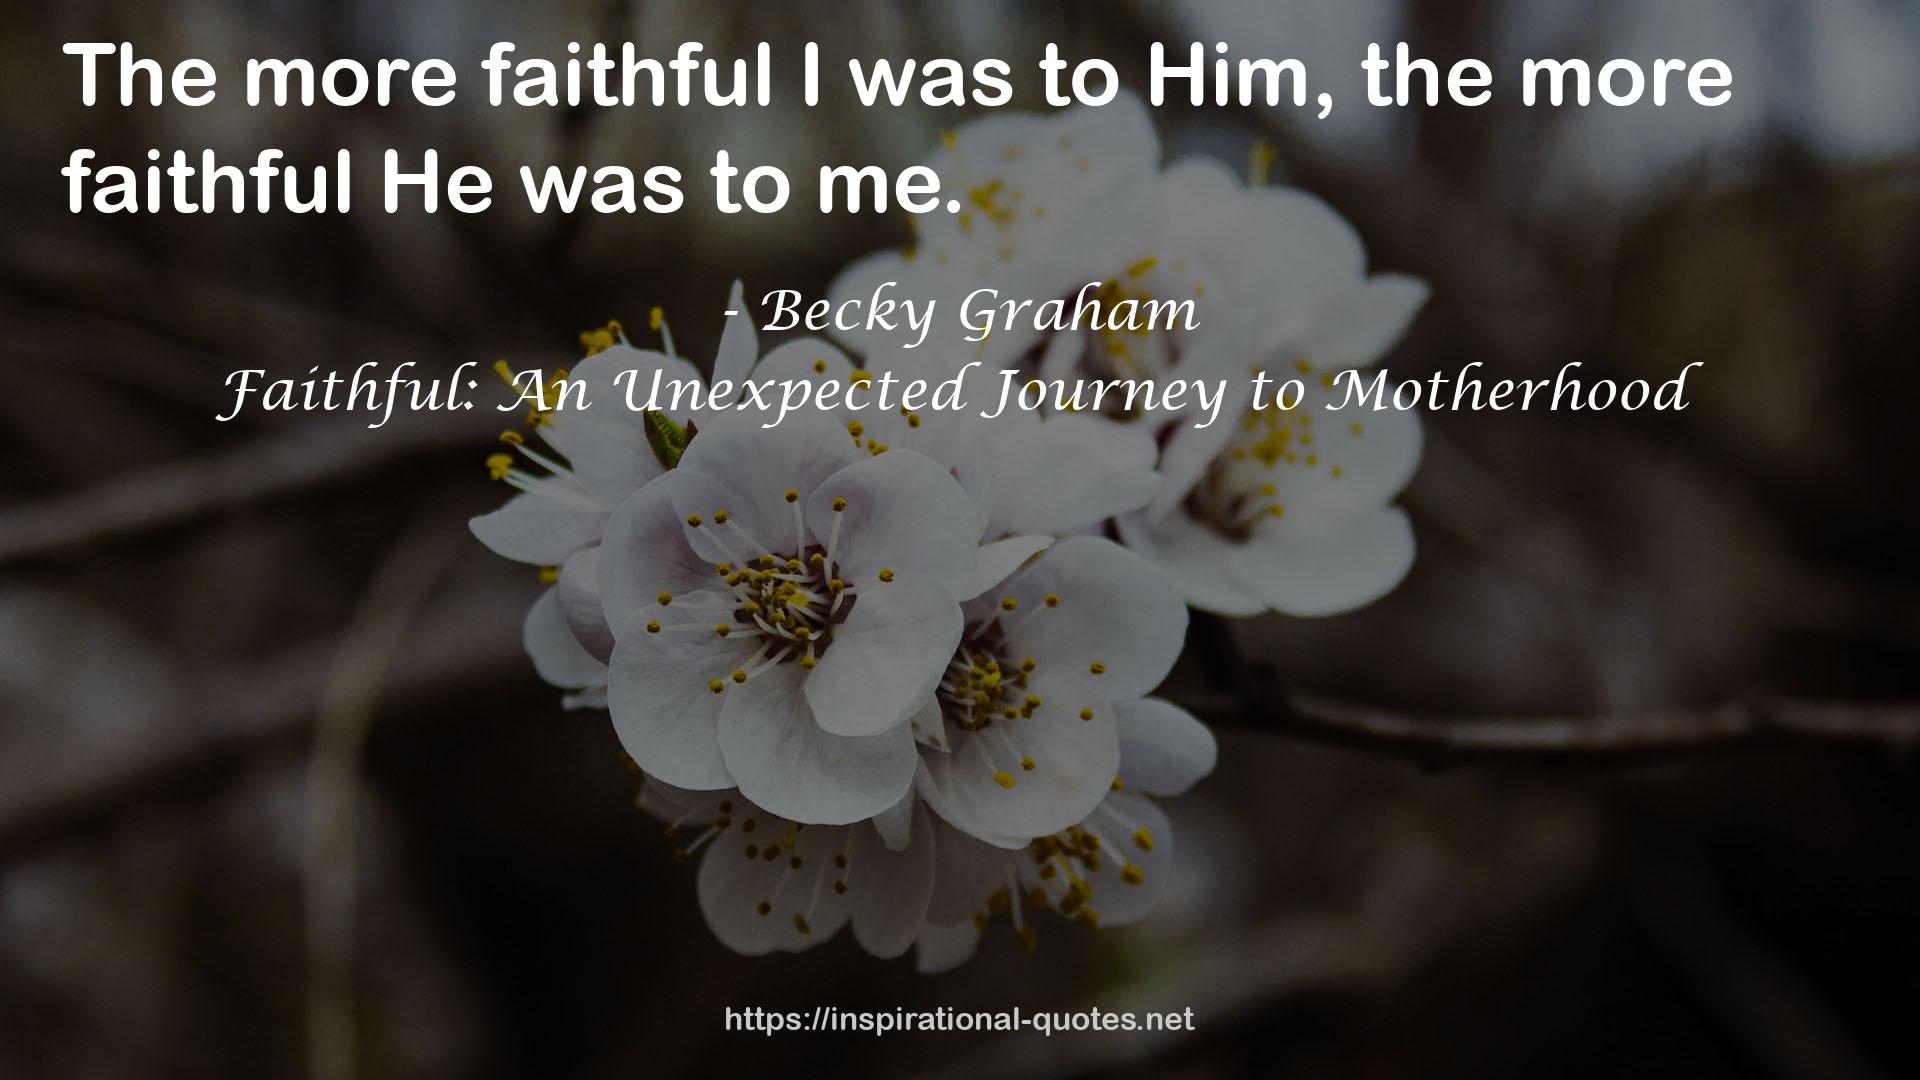 Faithful: An Unexpected Journey to Motherhood QUOTES